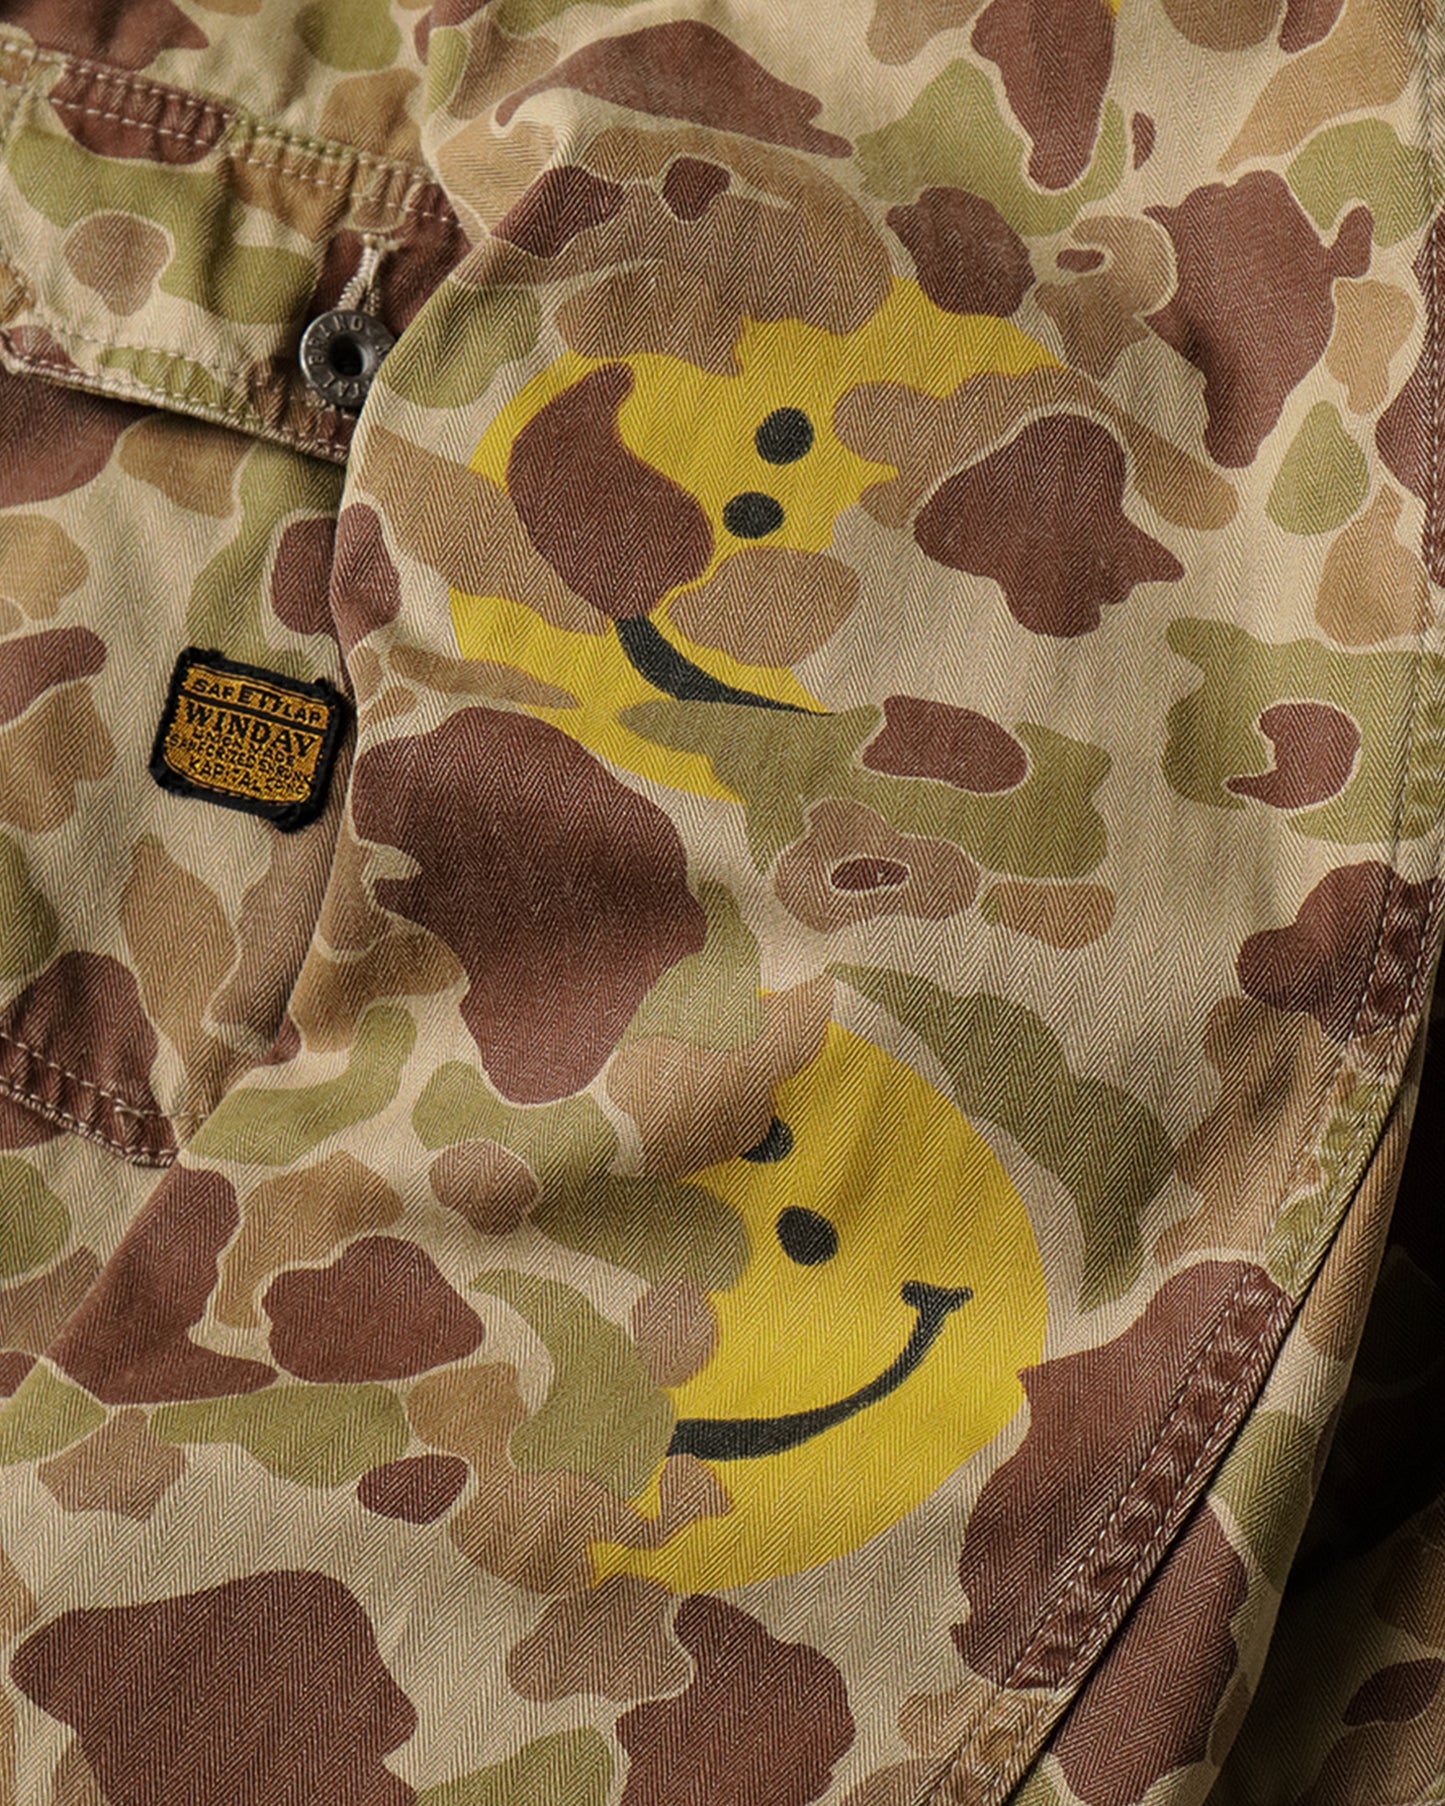 A military-like camouflage 1st jacket with smiley faces peeking out.